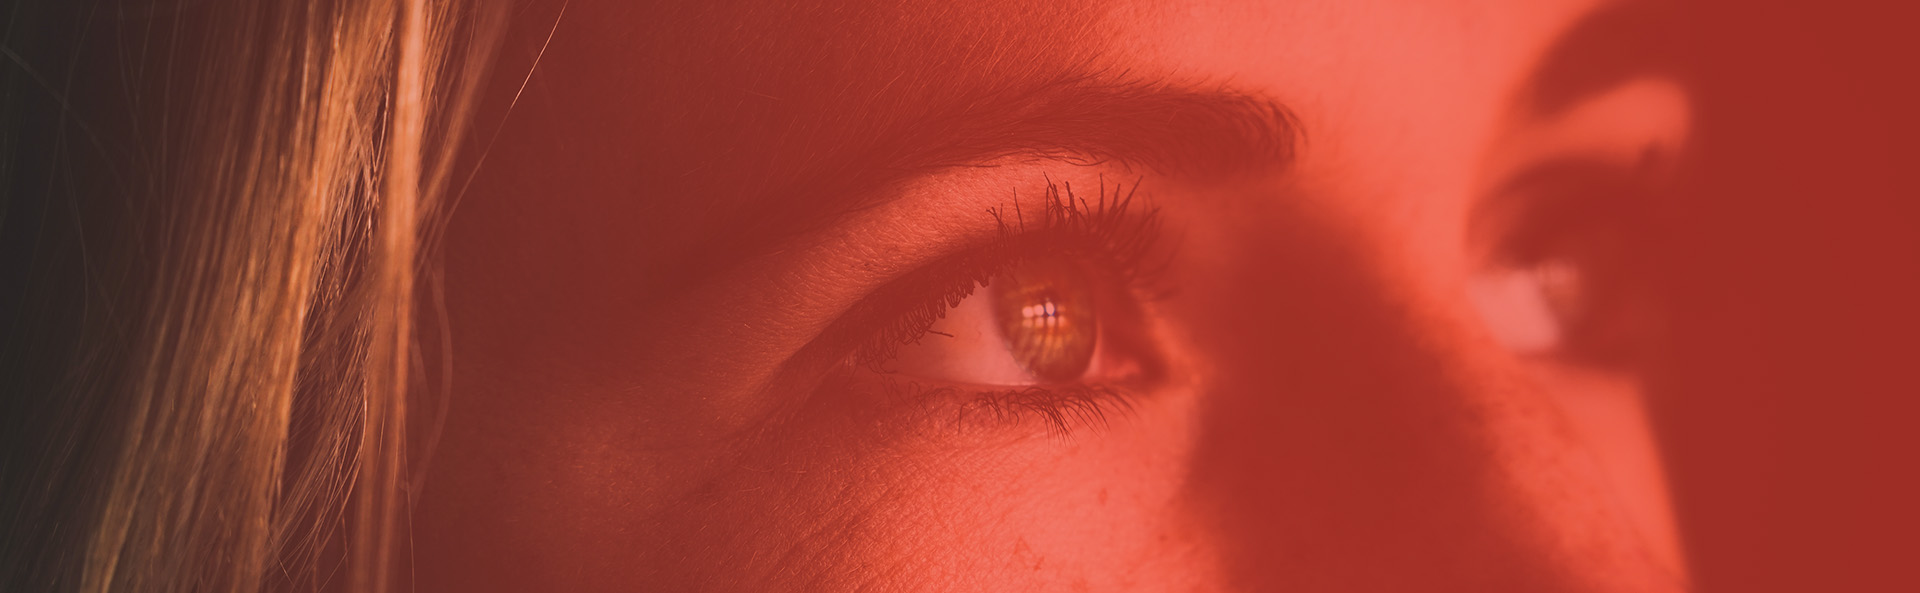 Eye Health and Using Red Light Therapy to Improve Vision